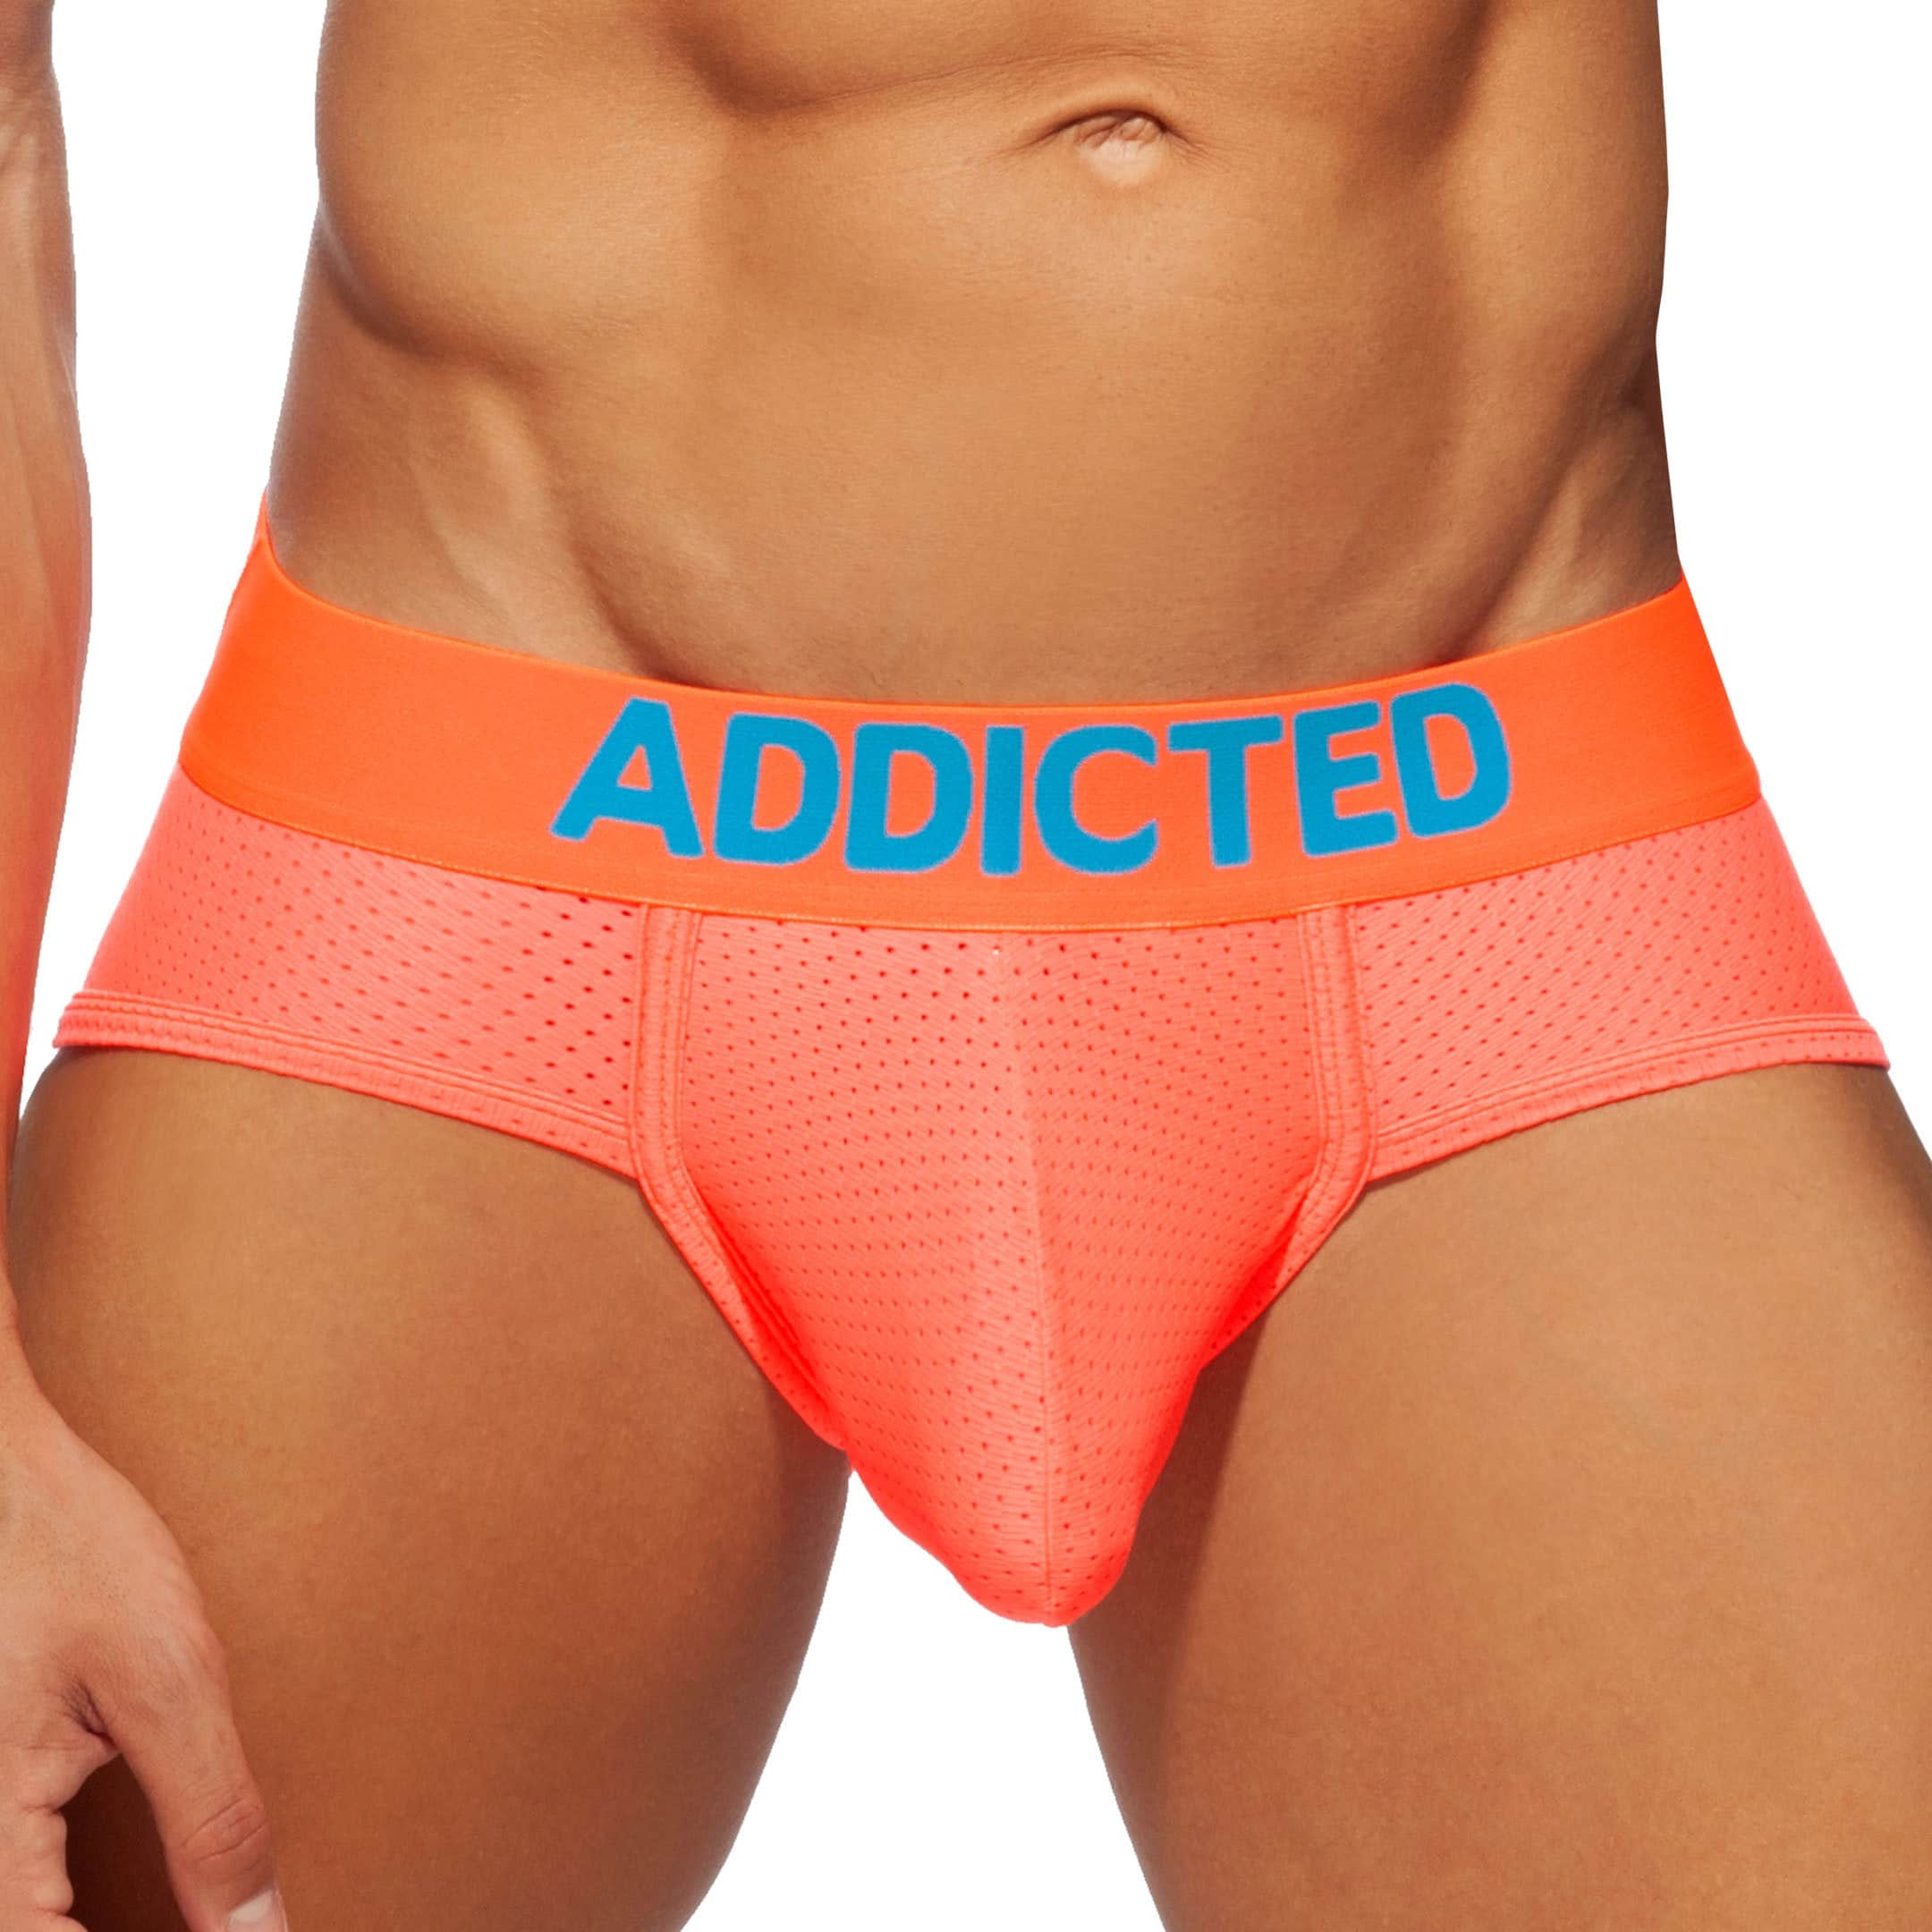 Sport mesh brief - black: Briefs for man brand ADDICTED for sale on